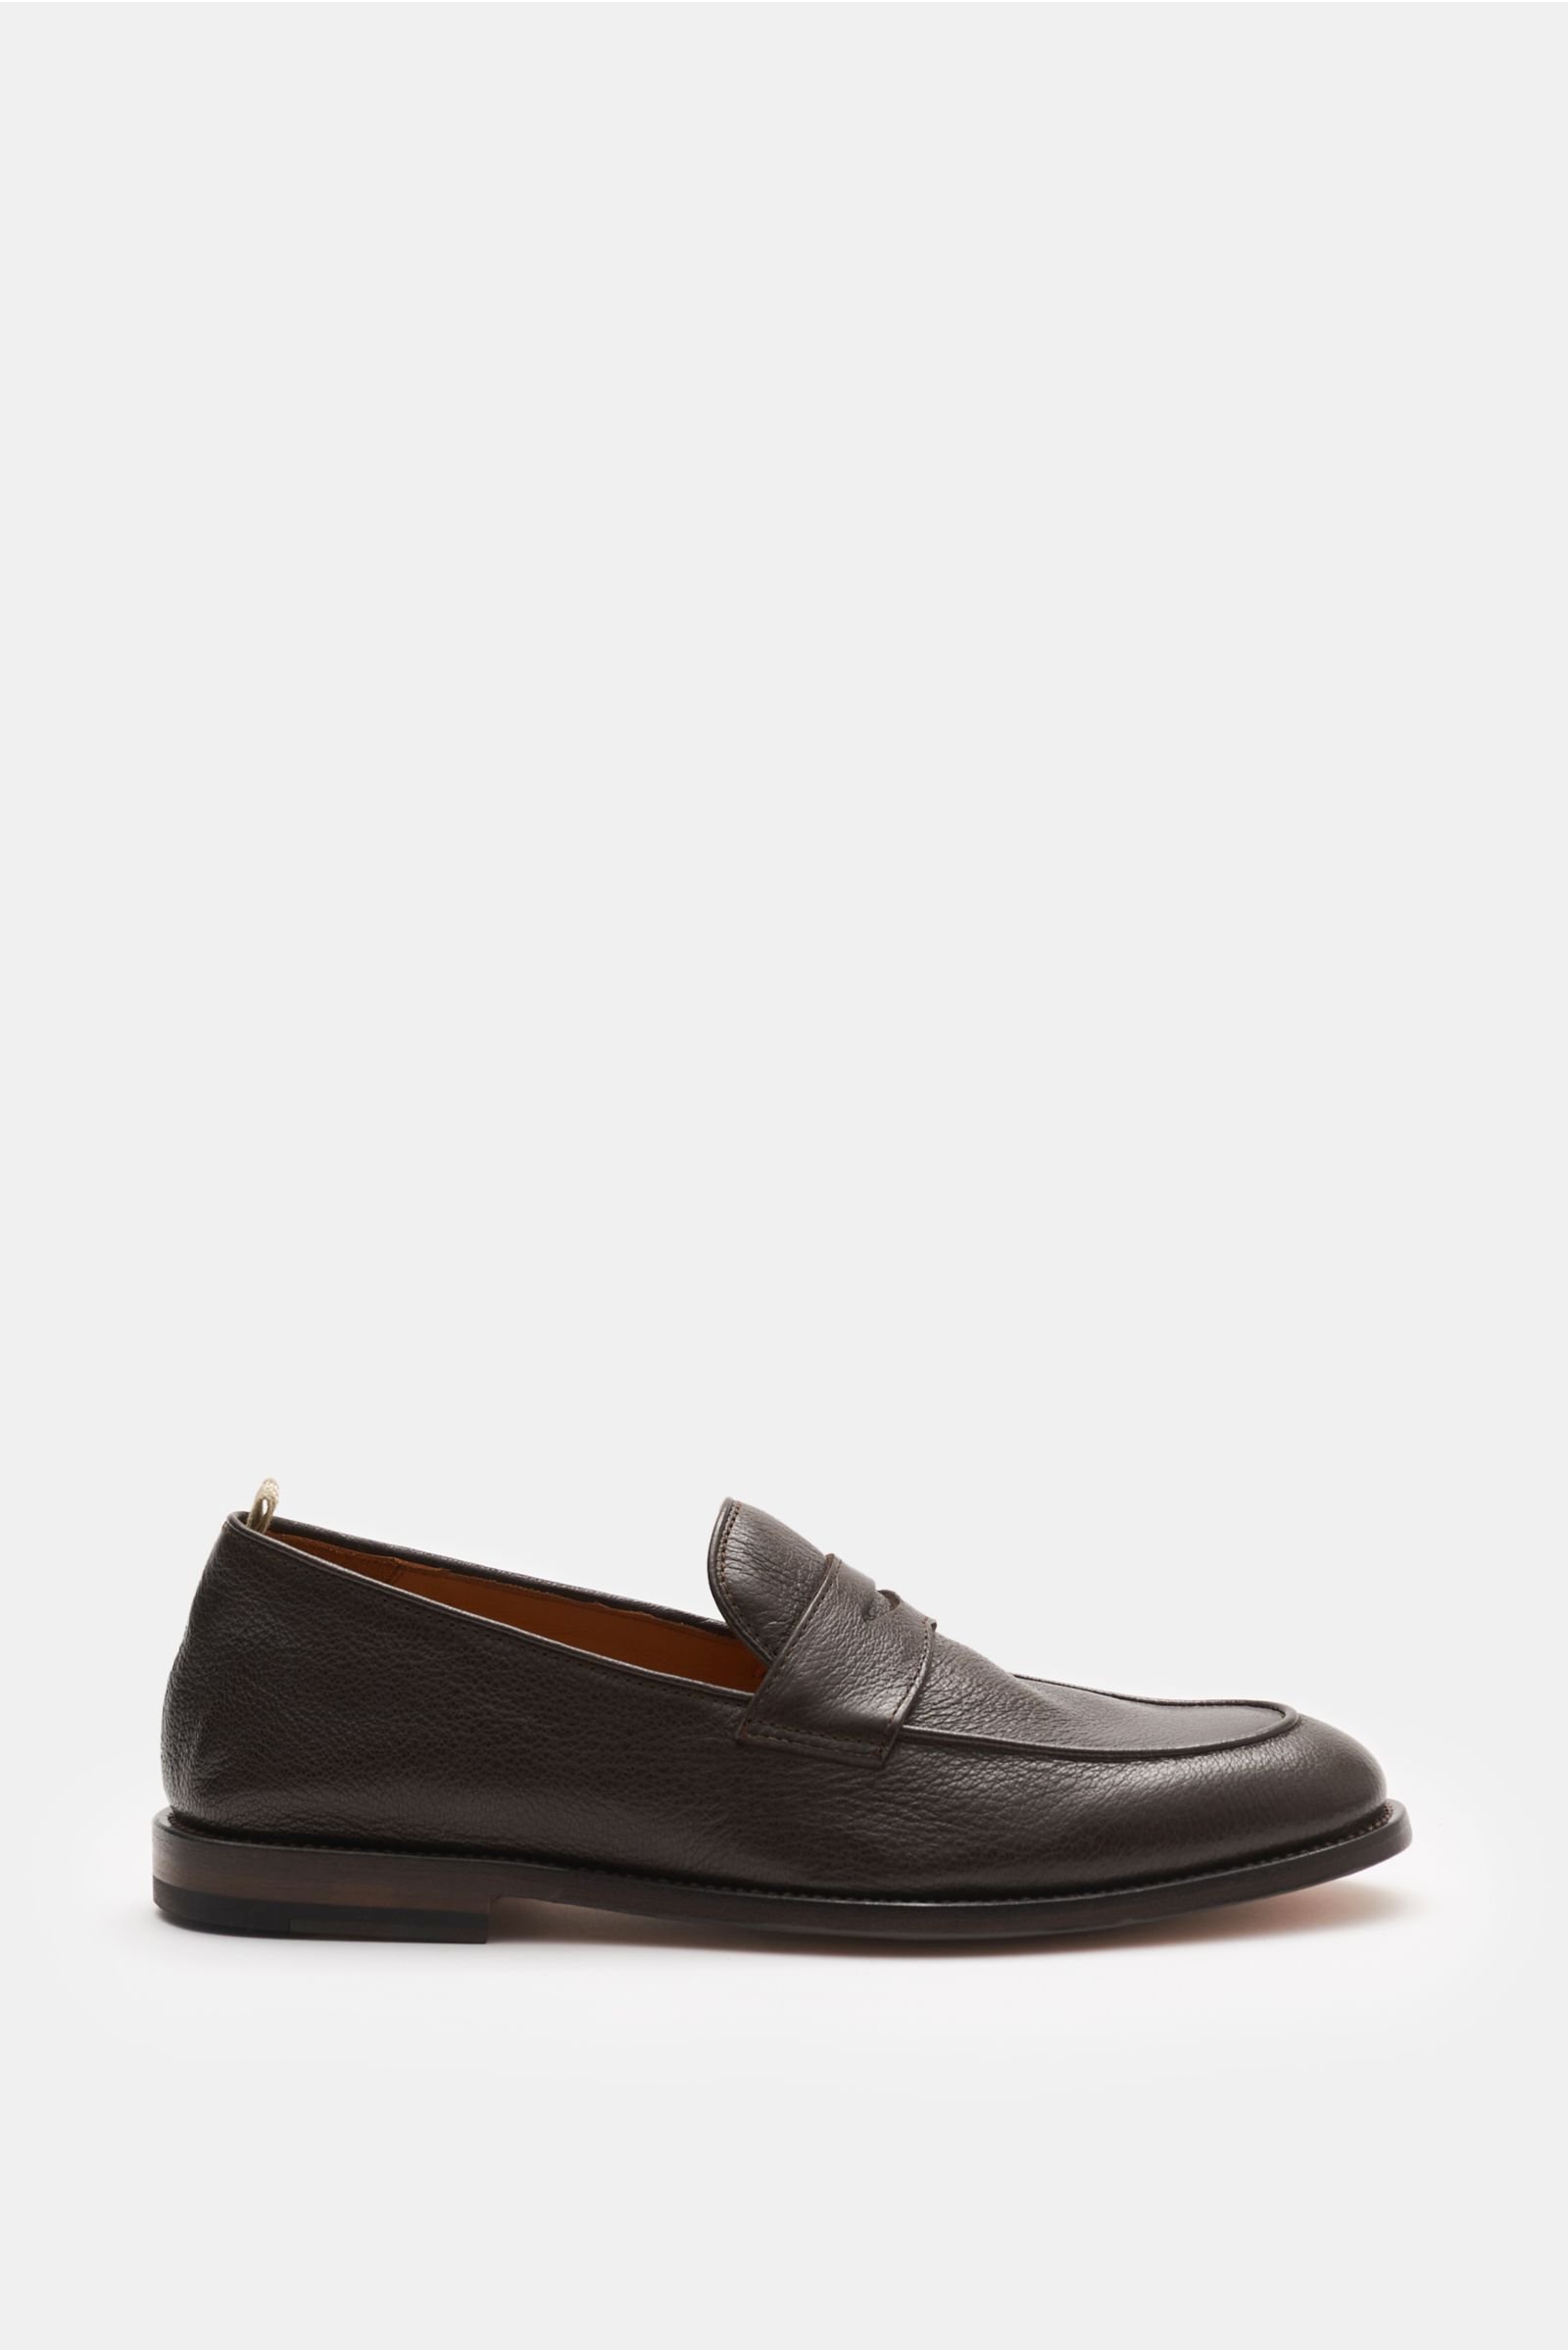 Penny loafers 'Opera 001' dark brown